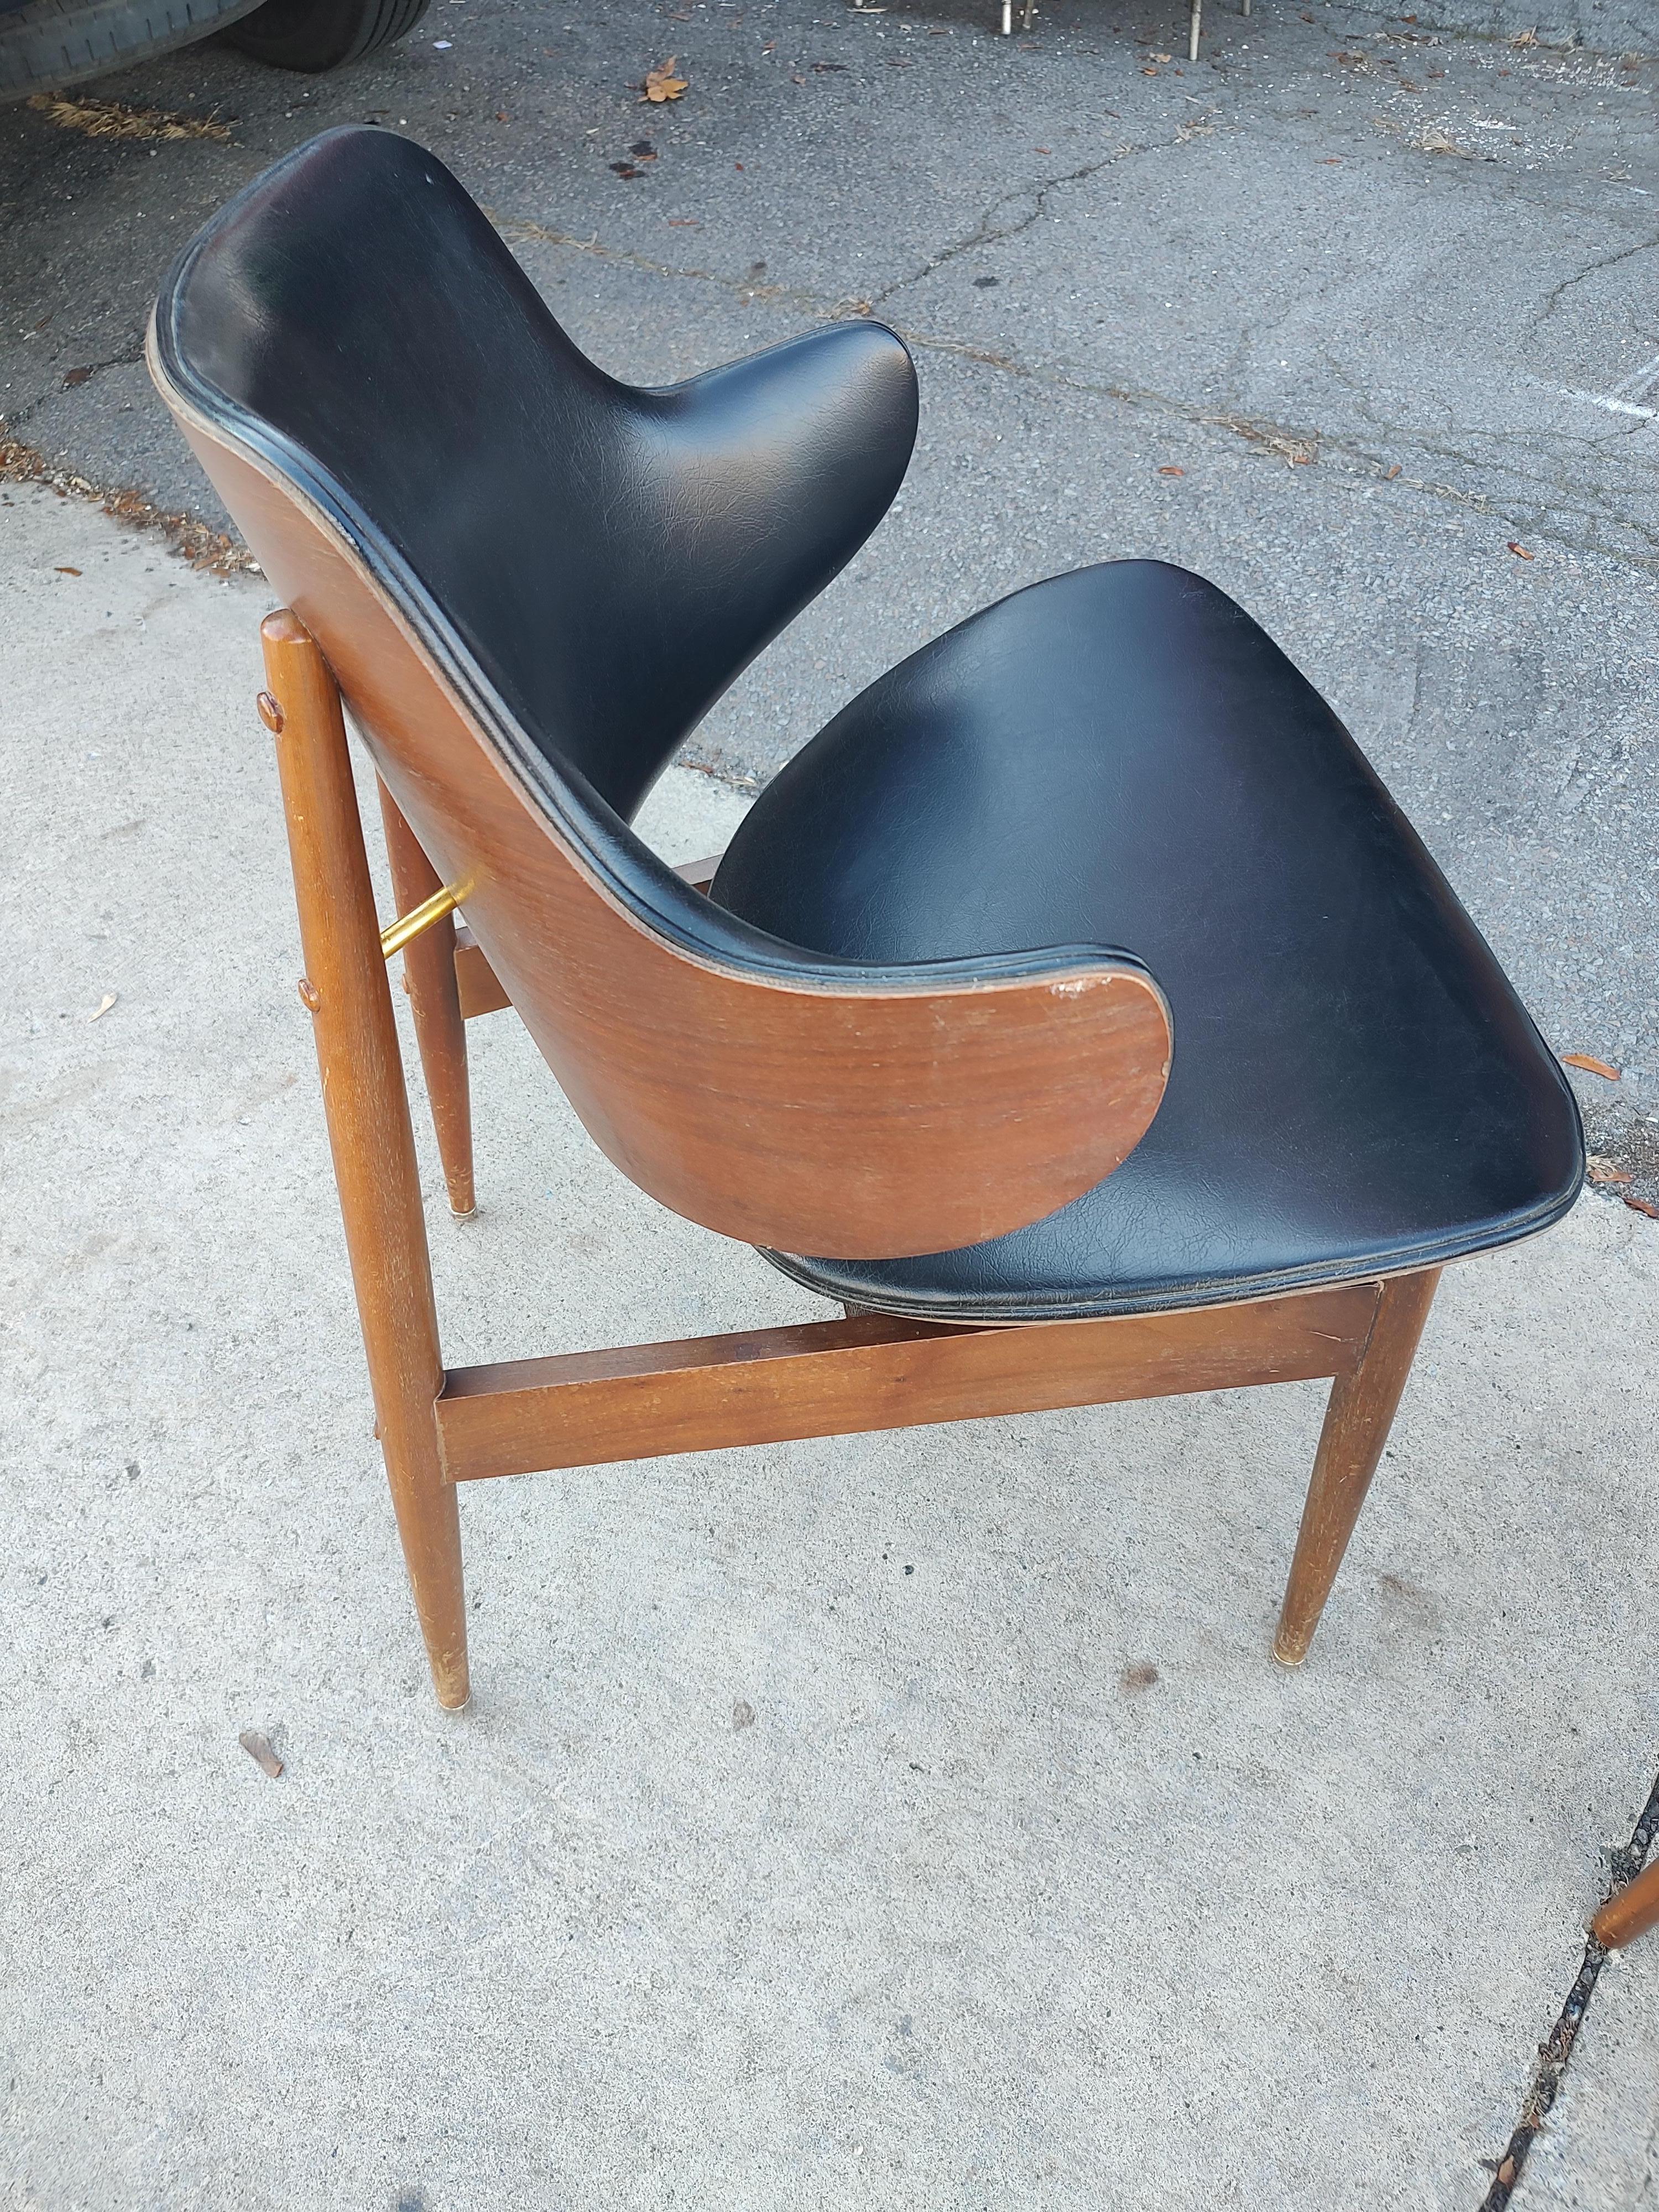 Mid Century Modern Kodawood Clam Shell Chairs by Seymour James Wiener For Sale 1